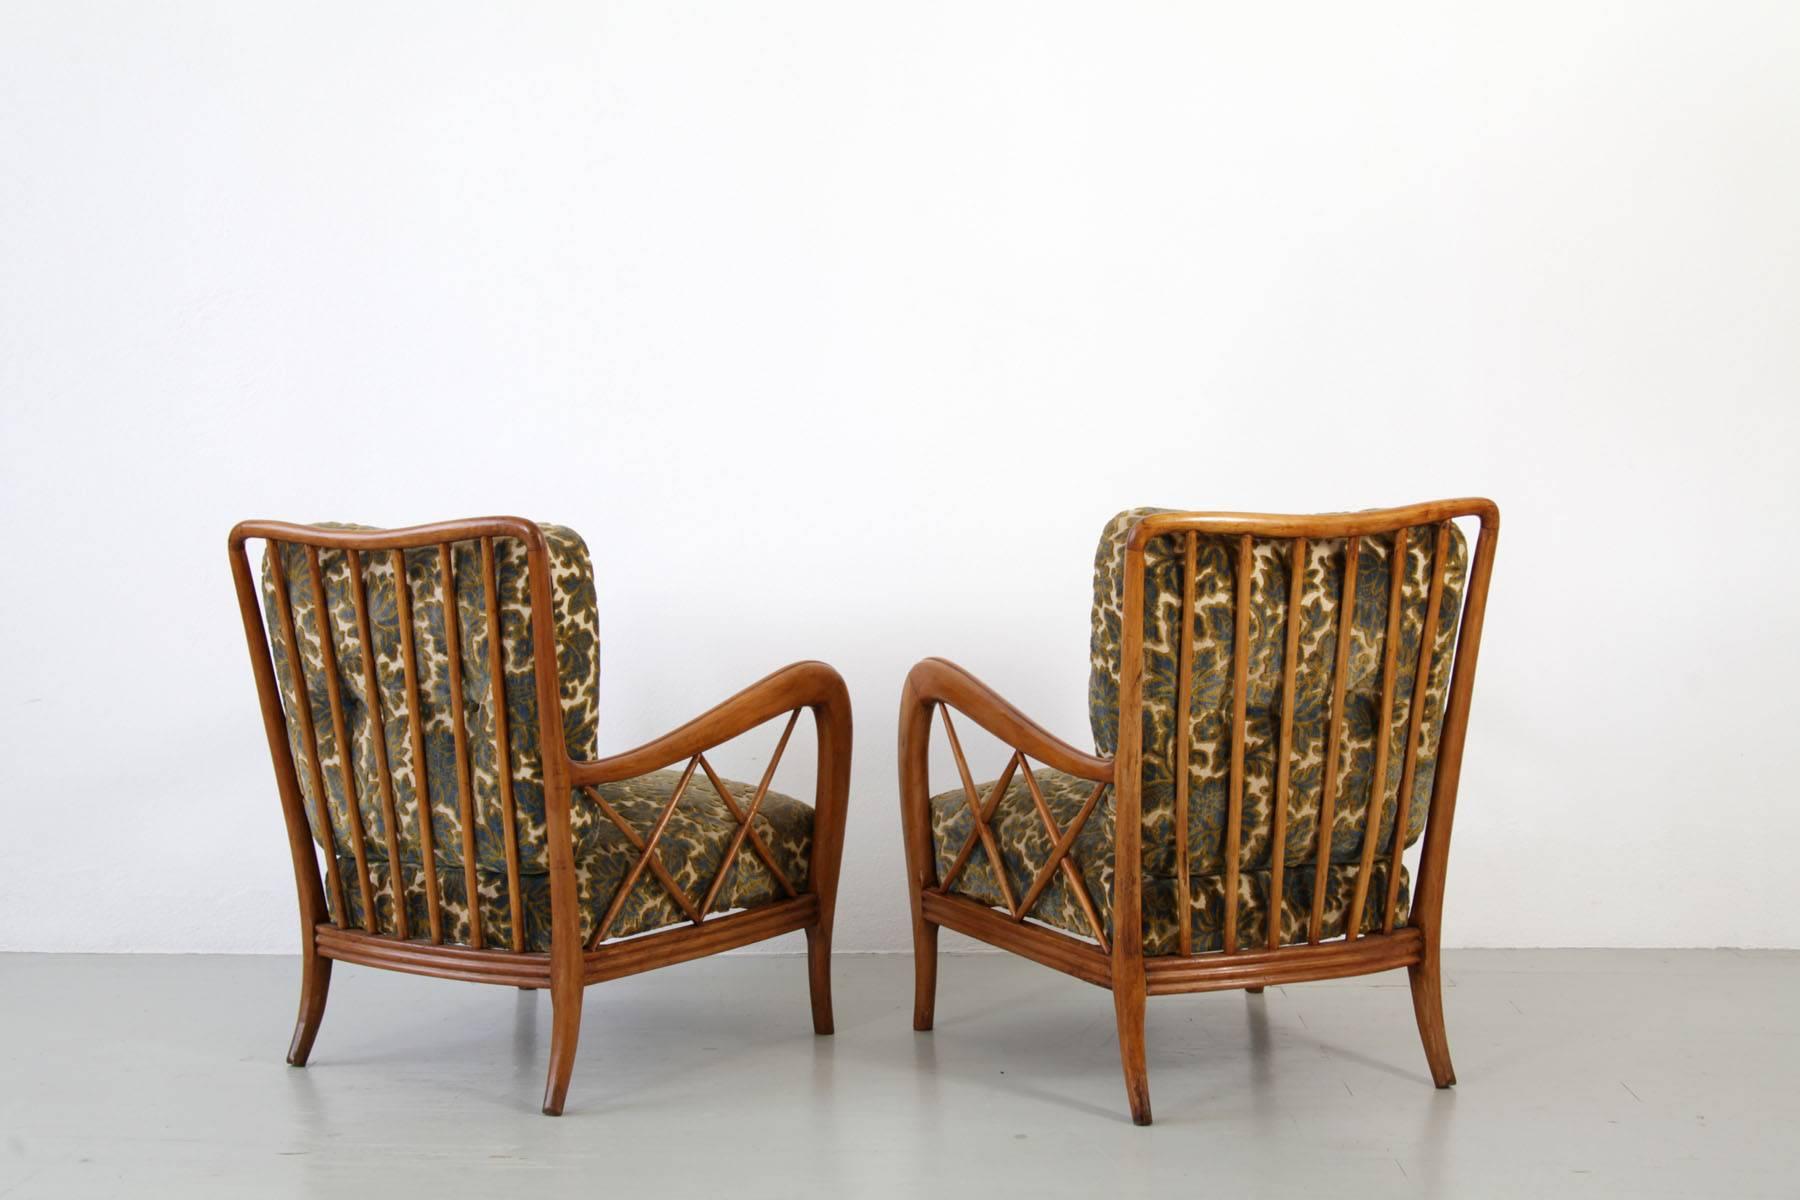 Set of 2 authentic Italian armchairs with footstools from the 1940s from Paolo Buffa. Armchair is made of a structure of cherry wood and a floral patterned upholstery in good original condition.

